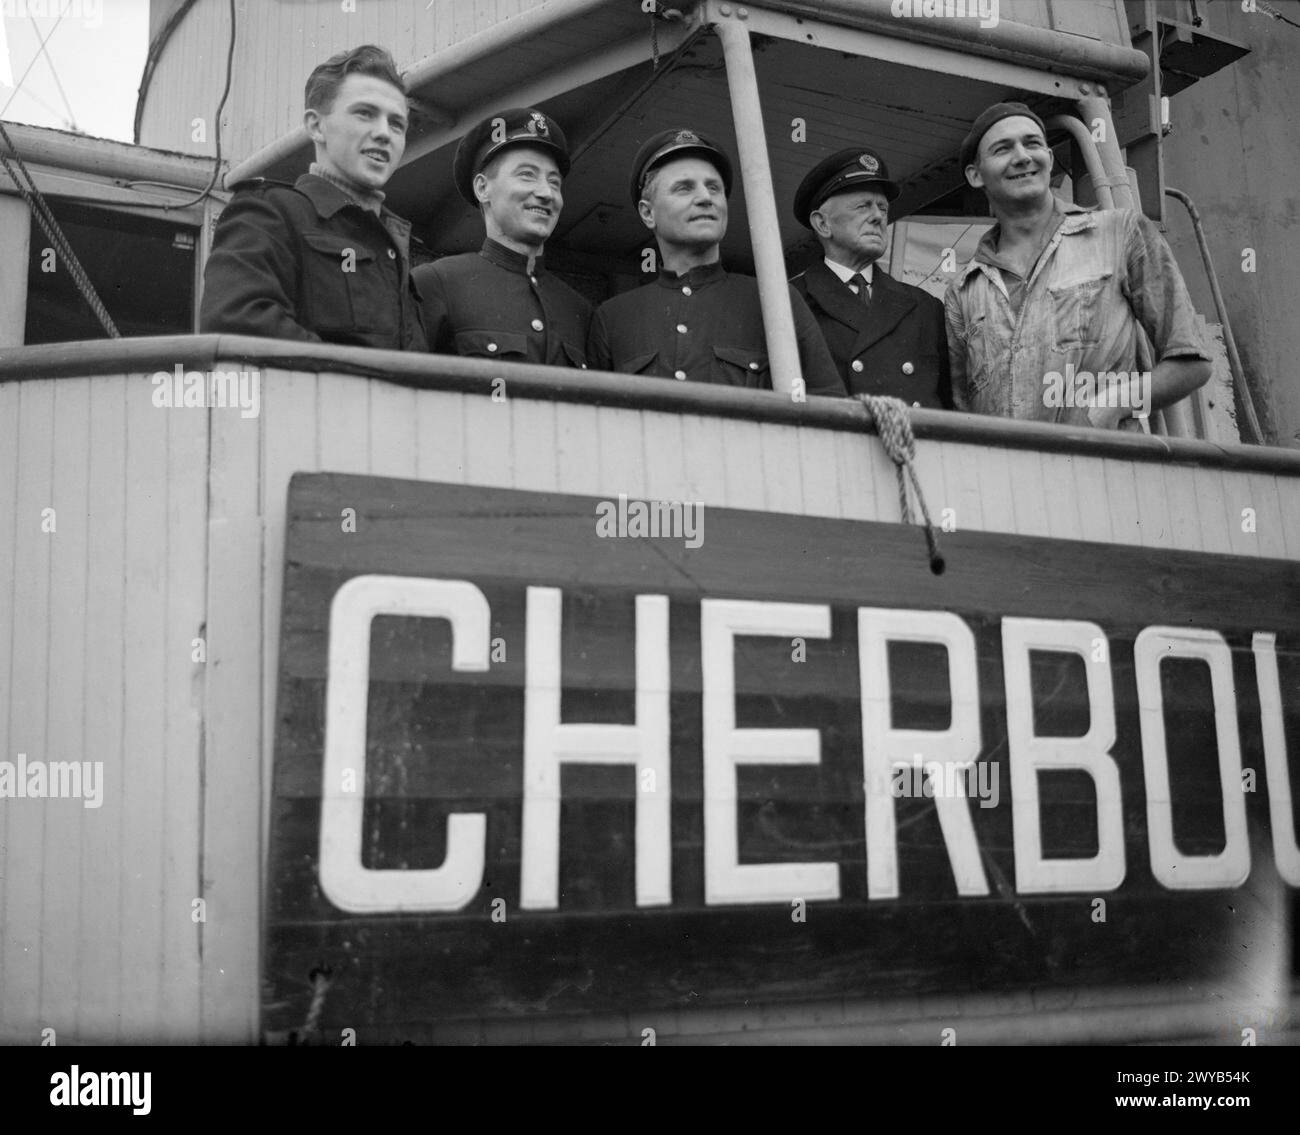 HARBOUR TUG RESCUES GRAIN SHIP. 30 MAY 1944, GREENOCK. MEN OF THE HARBOUR TUG CHERBOURGEOIS III WHICH DASHED OUT INTO THE ATLANTIC TO TOW IN A RUDDERLESS MERCHANT SHIP LADEN WITH GRAIN, AND AFTER TWO DAYS STEAMING AT 5 KNOTS IN A HEAVY SWELL, SHE BROUGHT THE SHIP SAFELY TO HARBOUR. - Left to right: Radio Operator W Blake, of Glasgow; Chief Steward R A Farley, from Sunderland; Captain H Martell, the Skipper from Poole, Chief Officer Robert Reid, from Belfast; and Chief Engineer H G Hall, from Burnley, officers of the CHERBOURGEOIS III. , Stock Photo